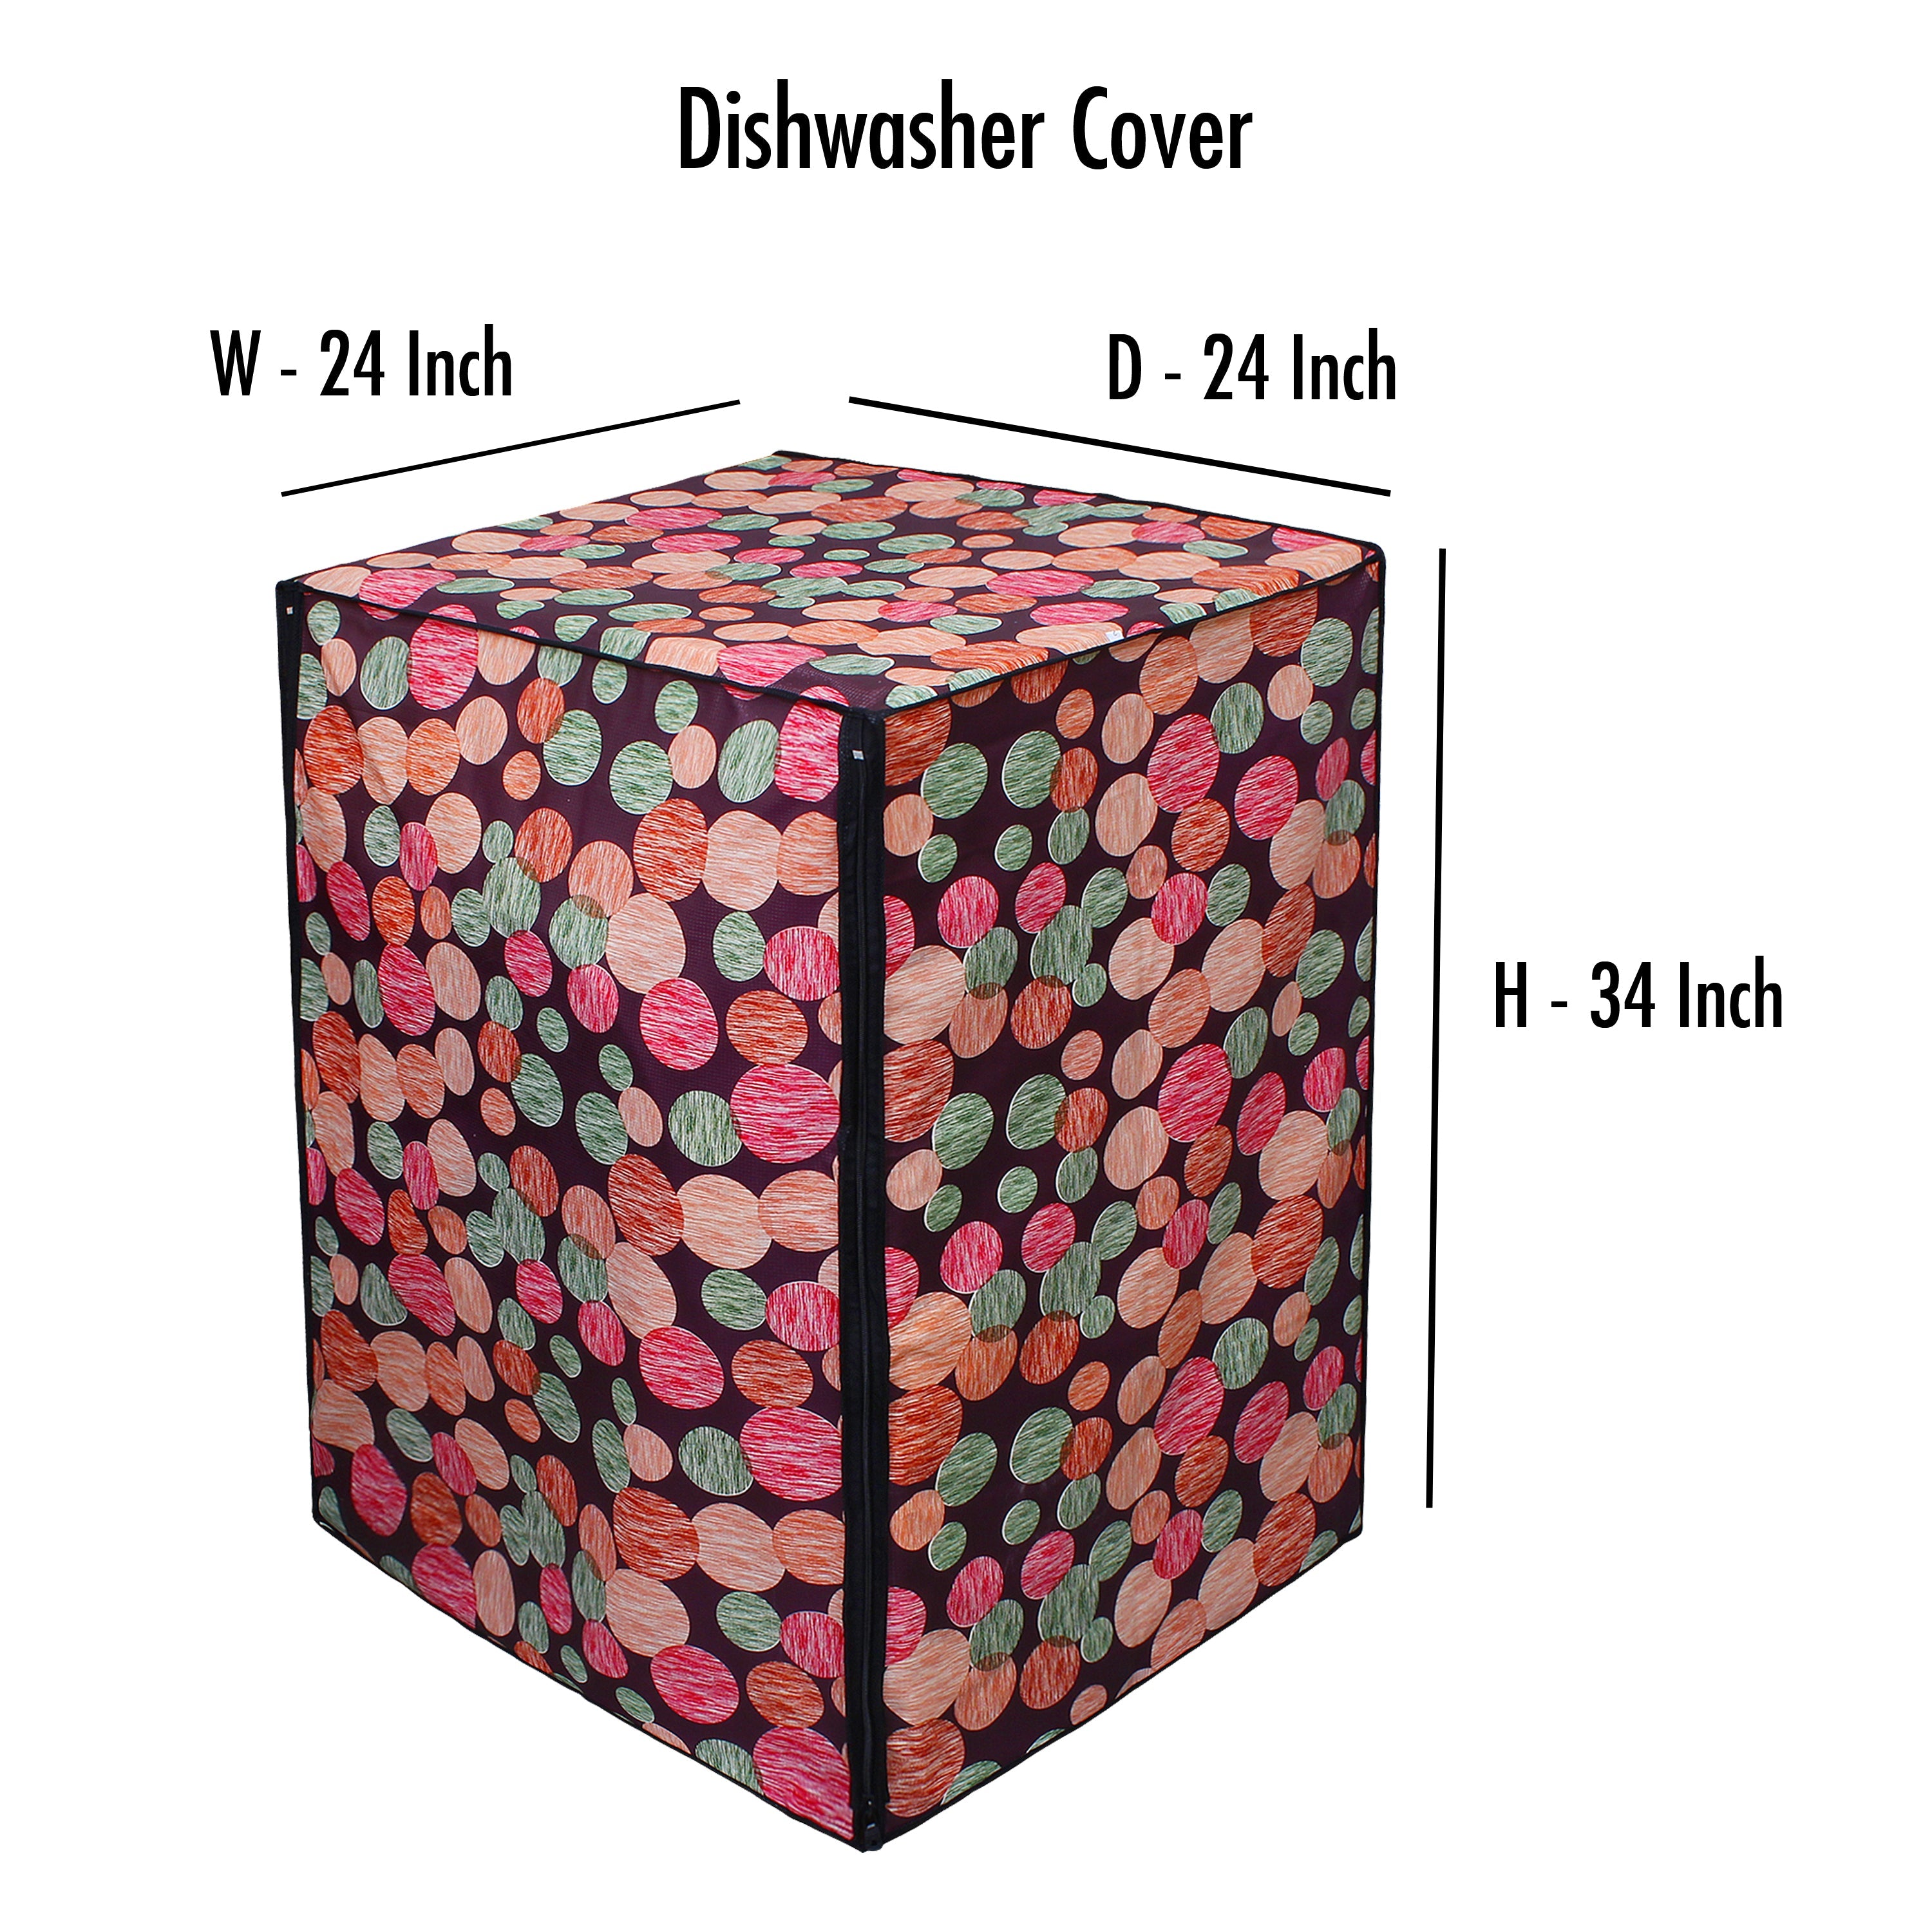 Waterproof and Dustproof Dishwasher Cover, SA66 - Dream Care Furnishings Private Limited